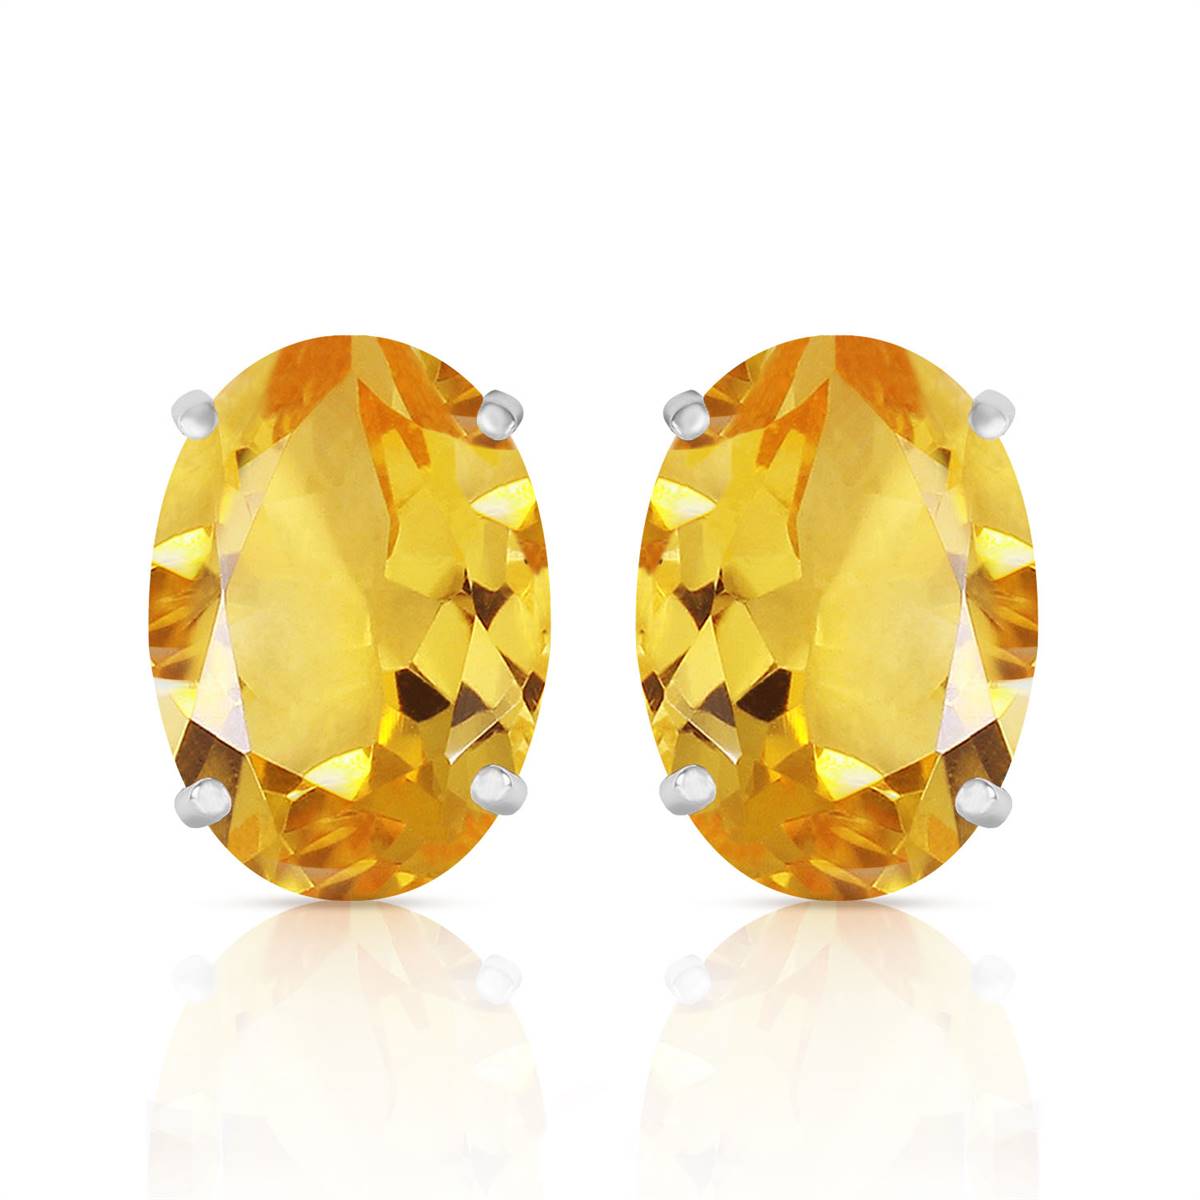 13 Carat 14K Solid White Gold French Clips Earrings Natural Citrine